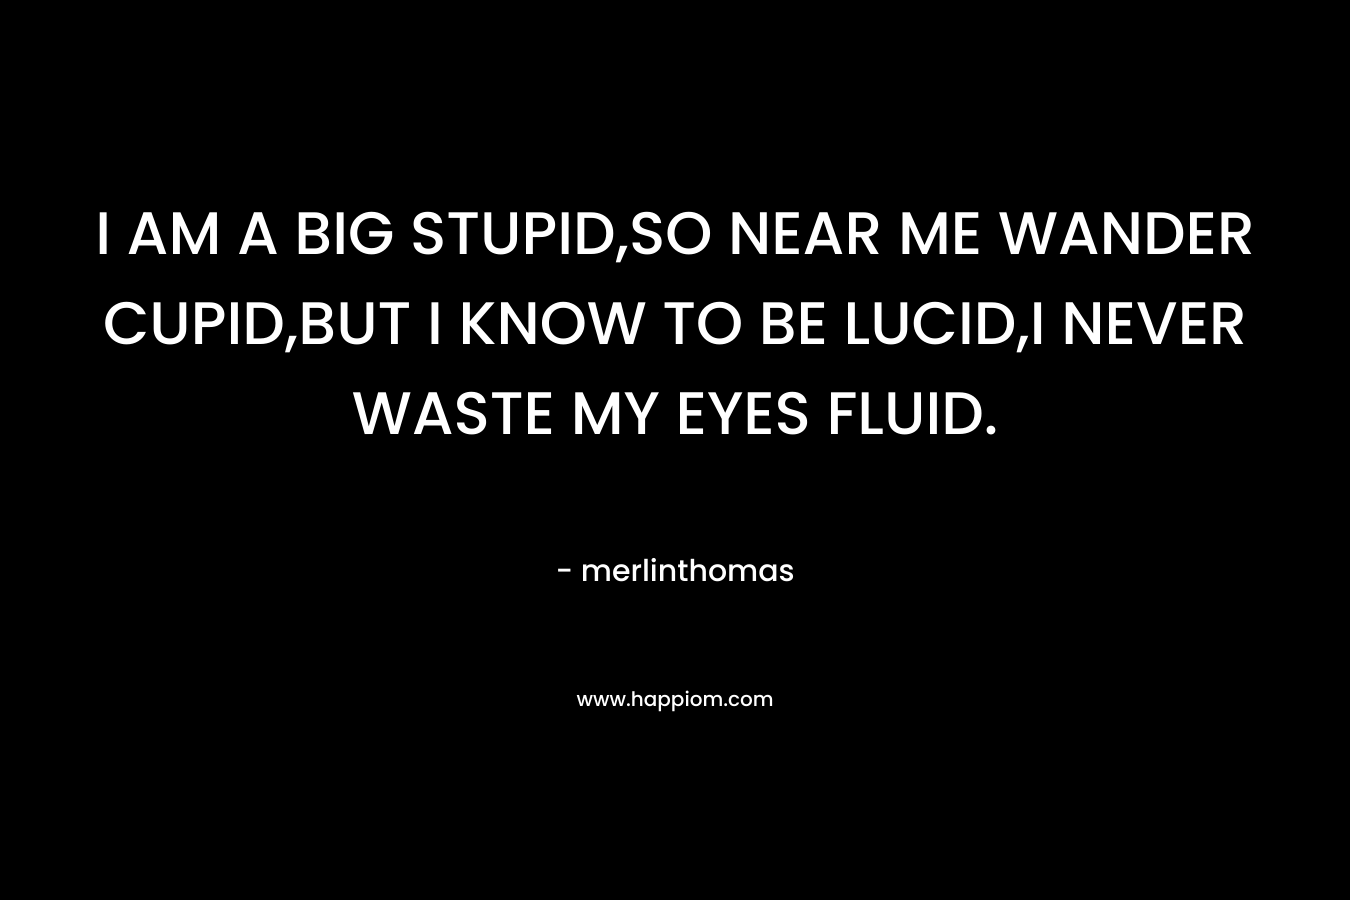 I AM A BIG STUPID,SO NEAR ME WANDER CUPID,BUT I KNOW TO BE LUCID,I NEVER WASTE MY EYES FLUID. – merlinthomas